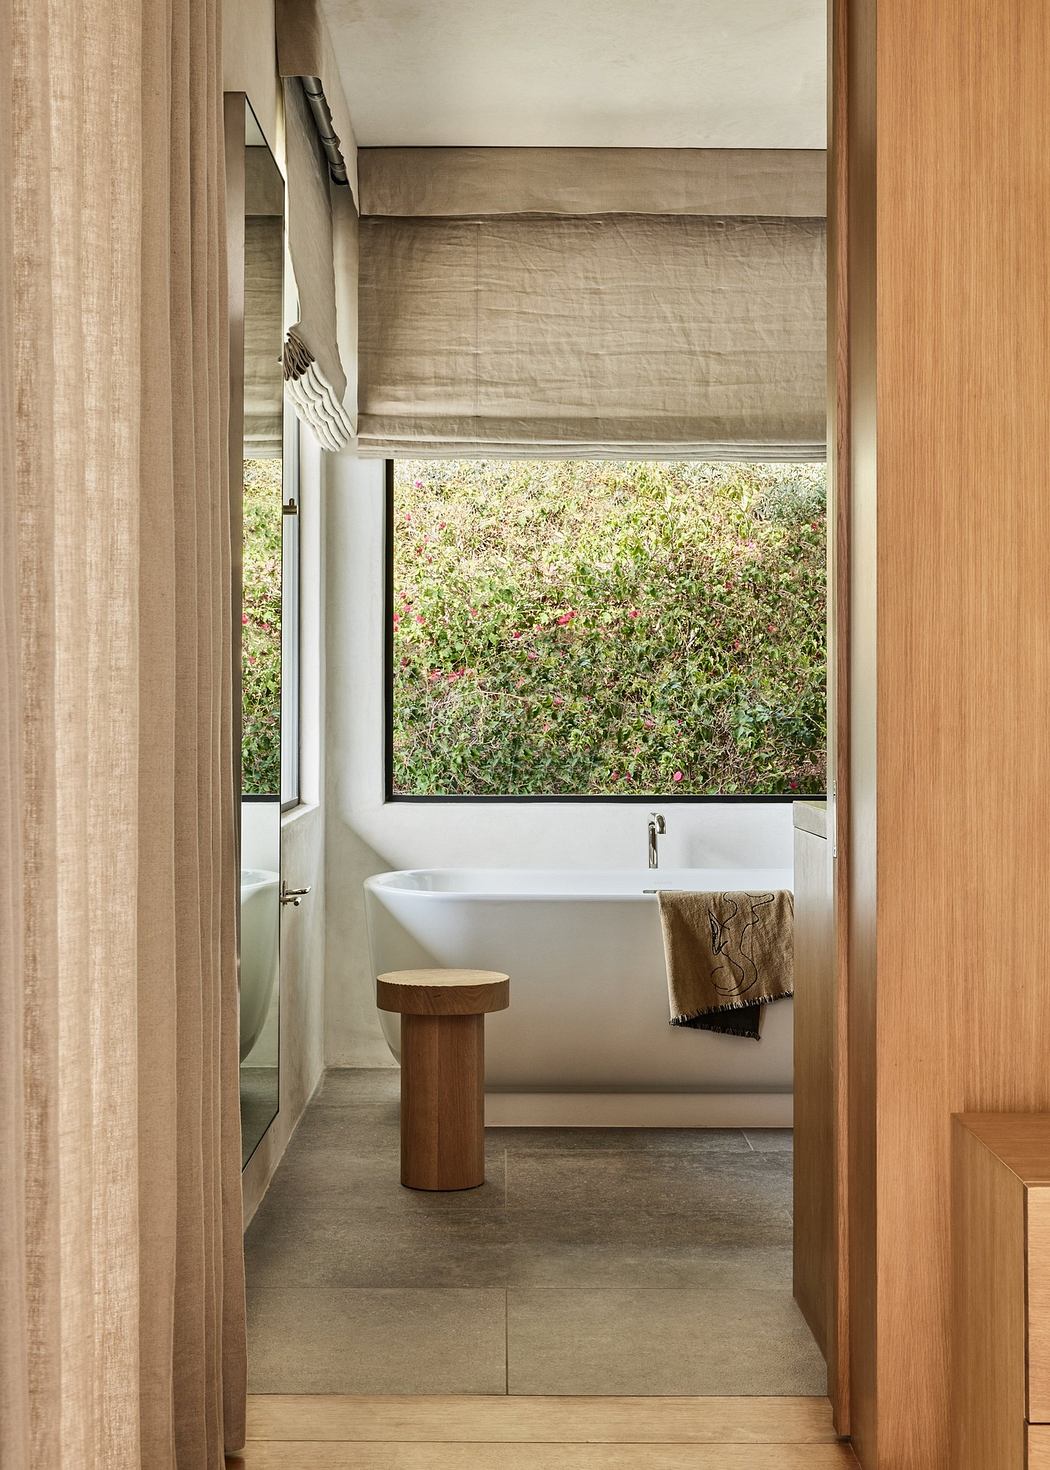 Minimalist bathroom with wooden accents and a garden view.